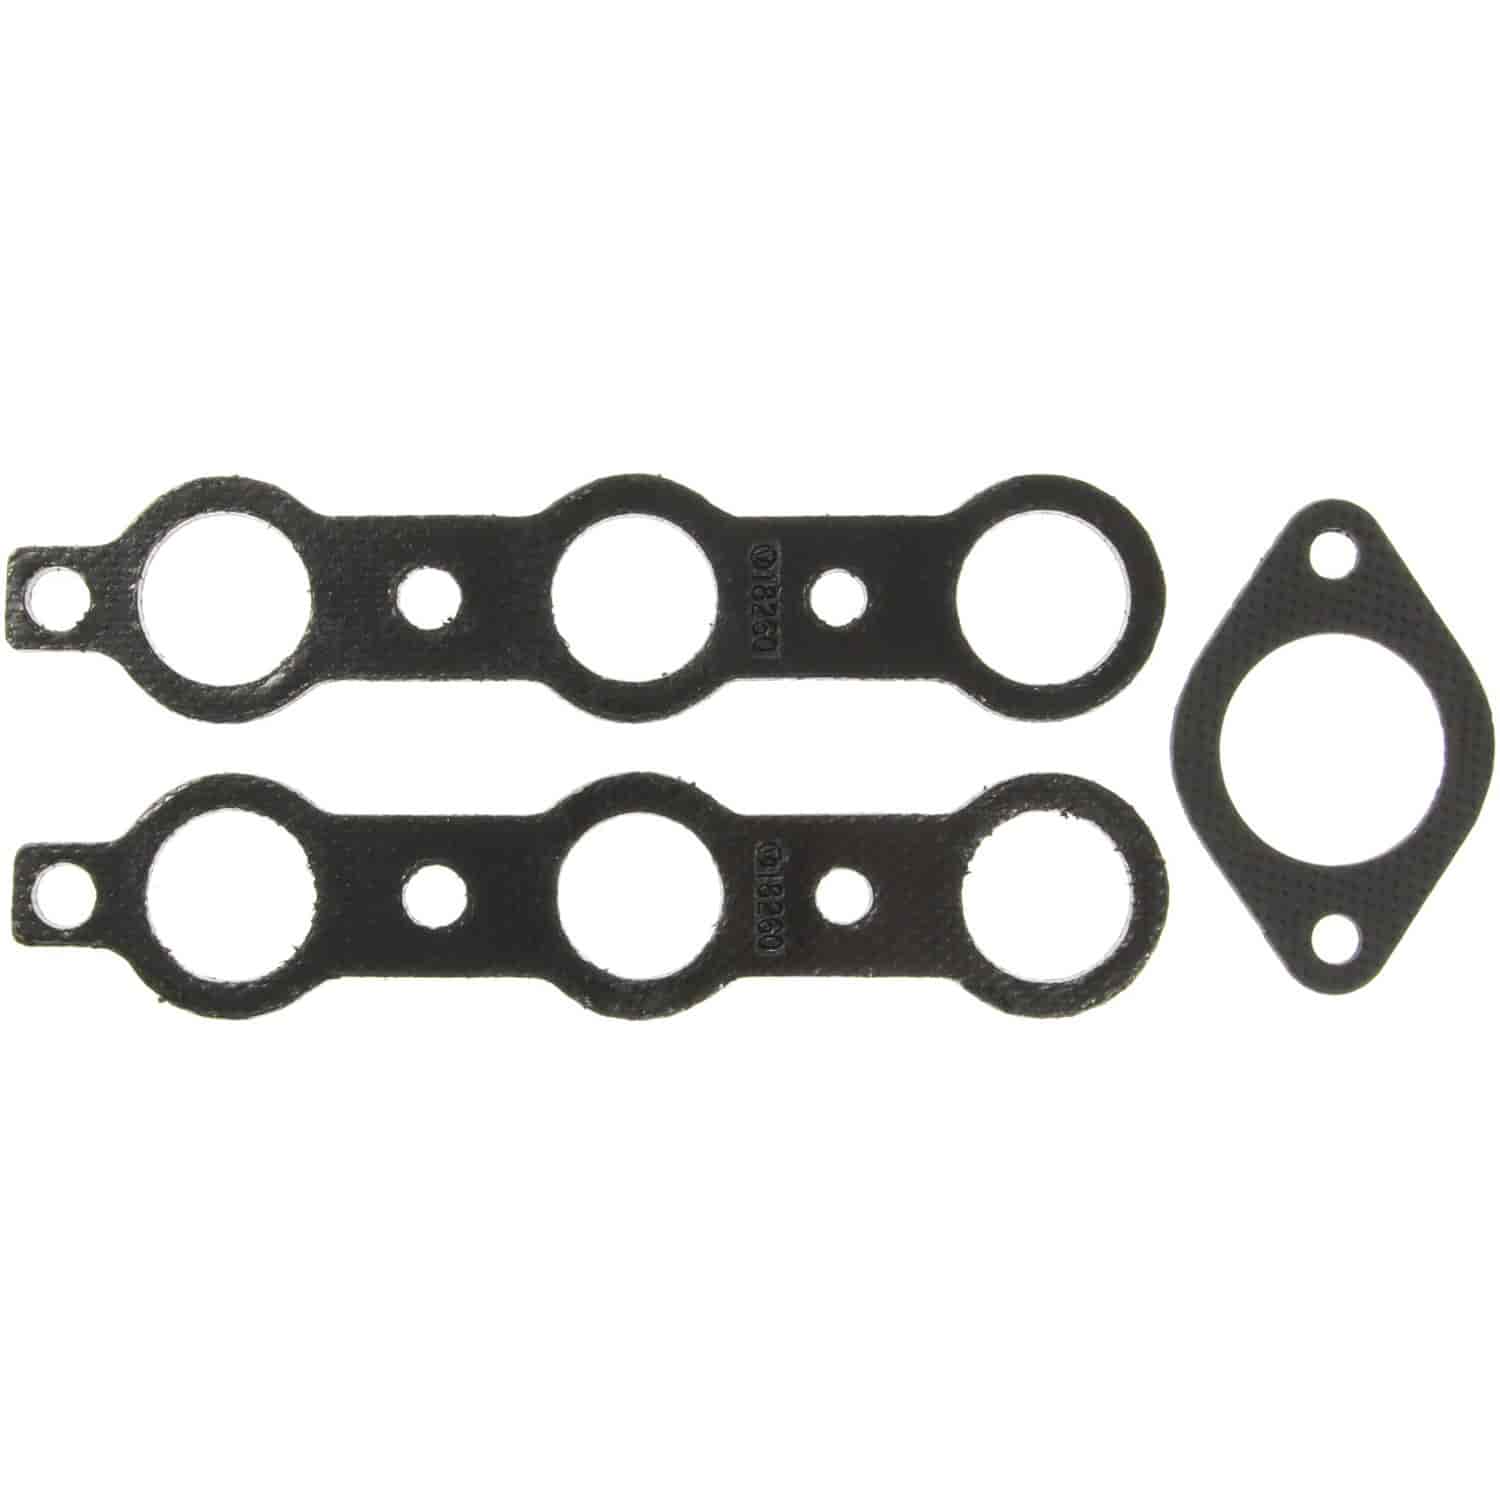 Intake And Exhaust Manifold Set Ford-Trac&Ind 134 53-76 int&exh NAA NAB 500 600 700 2000 3000 Series Wheel